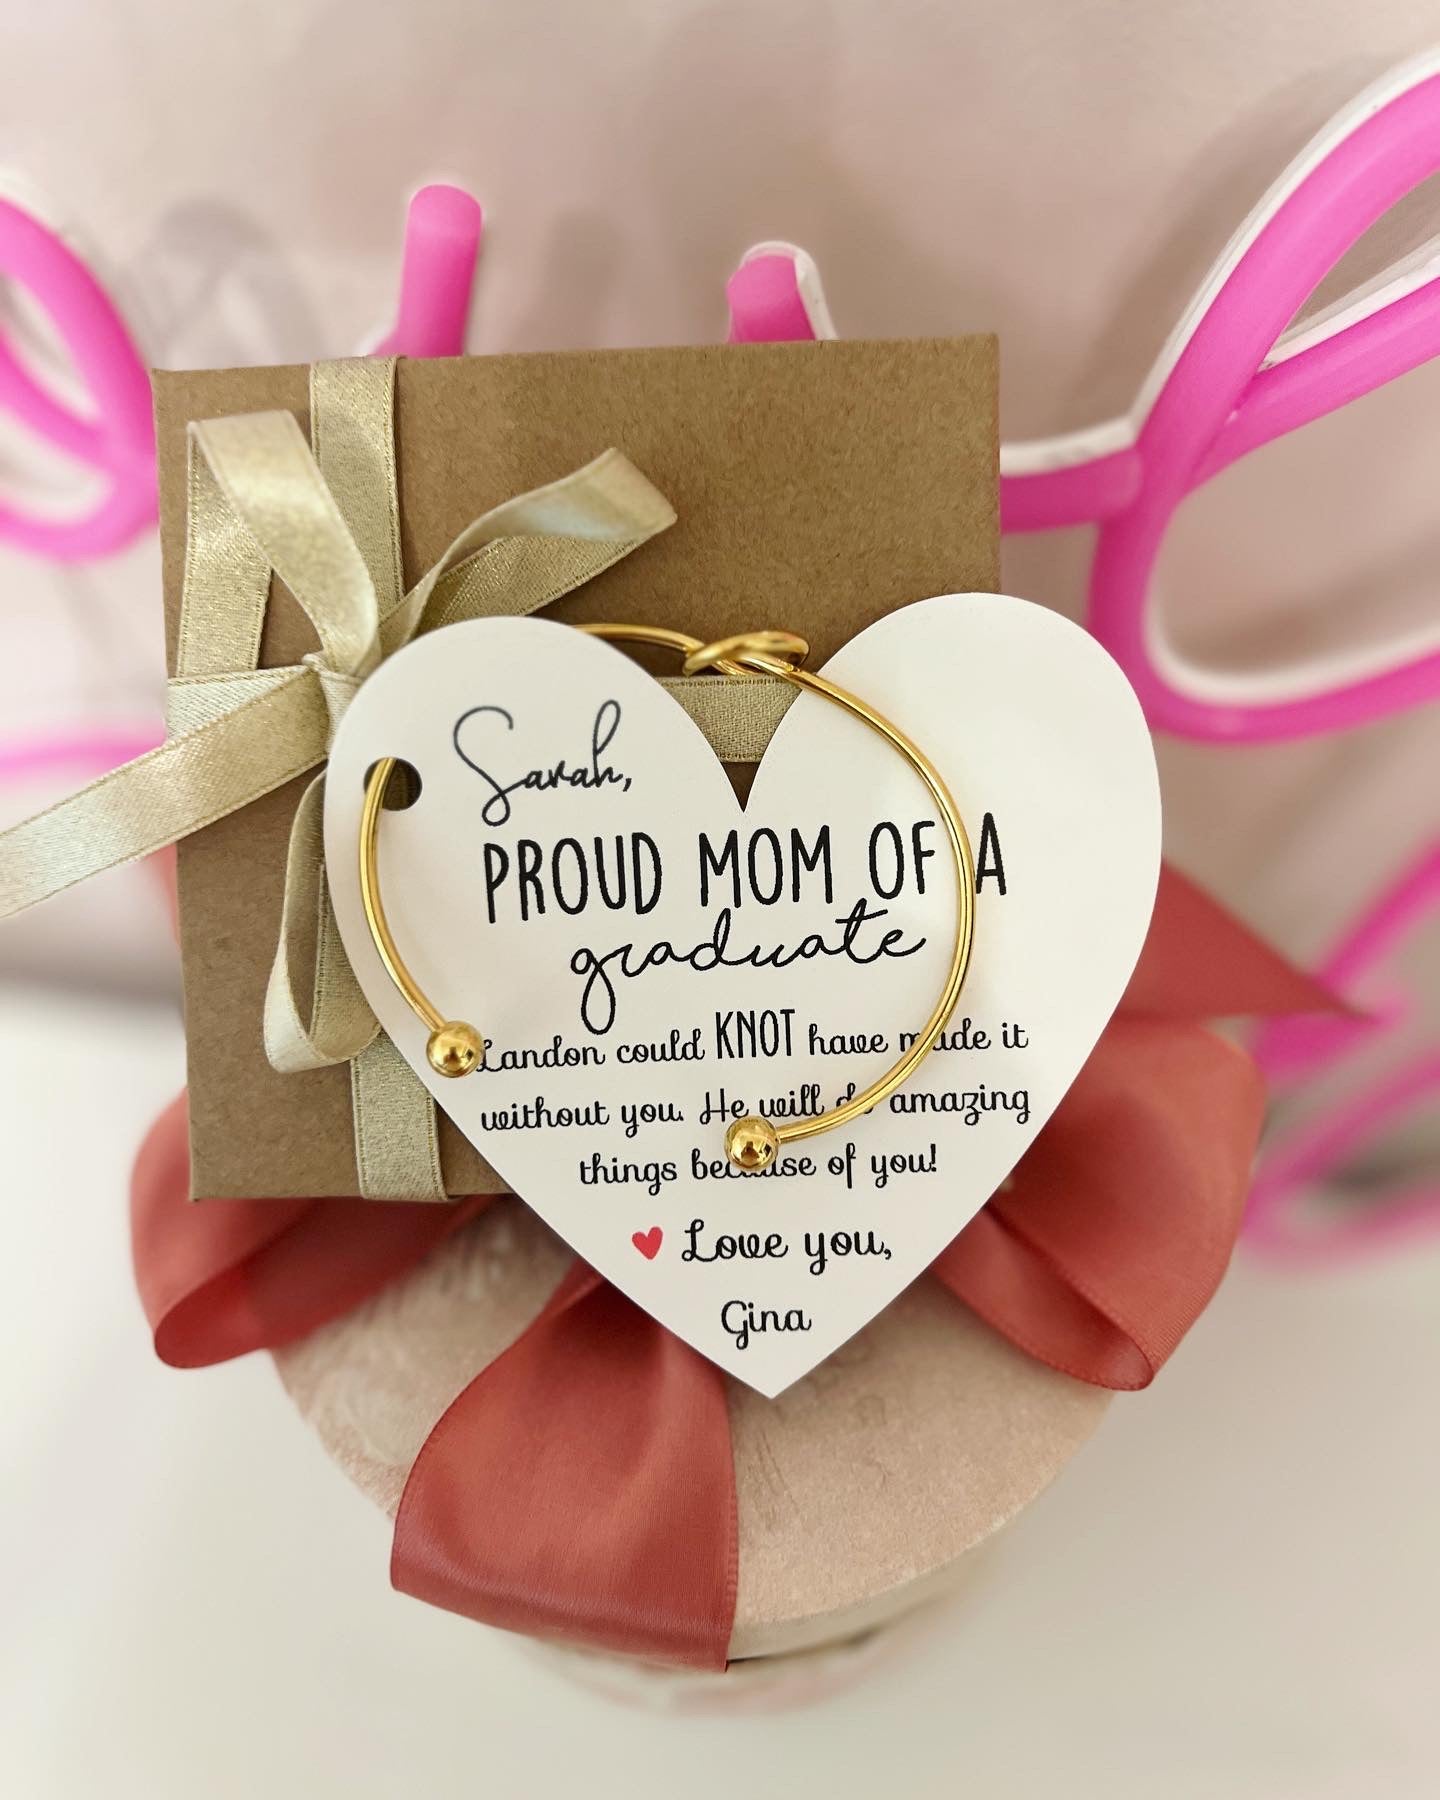 Proud Mom of a Graduate knot bangle gift, Graduation gift for parent, mom of a graduate, Graduation present, Gift for friend of graduate